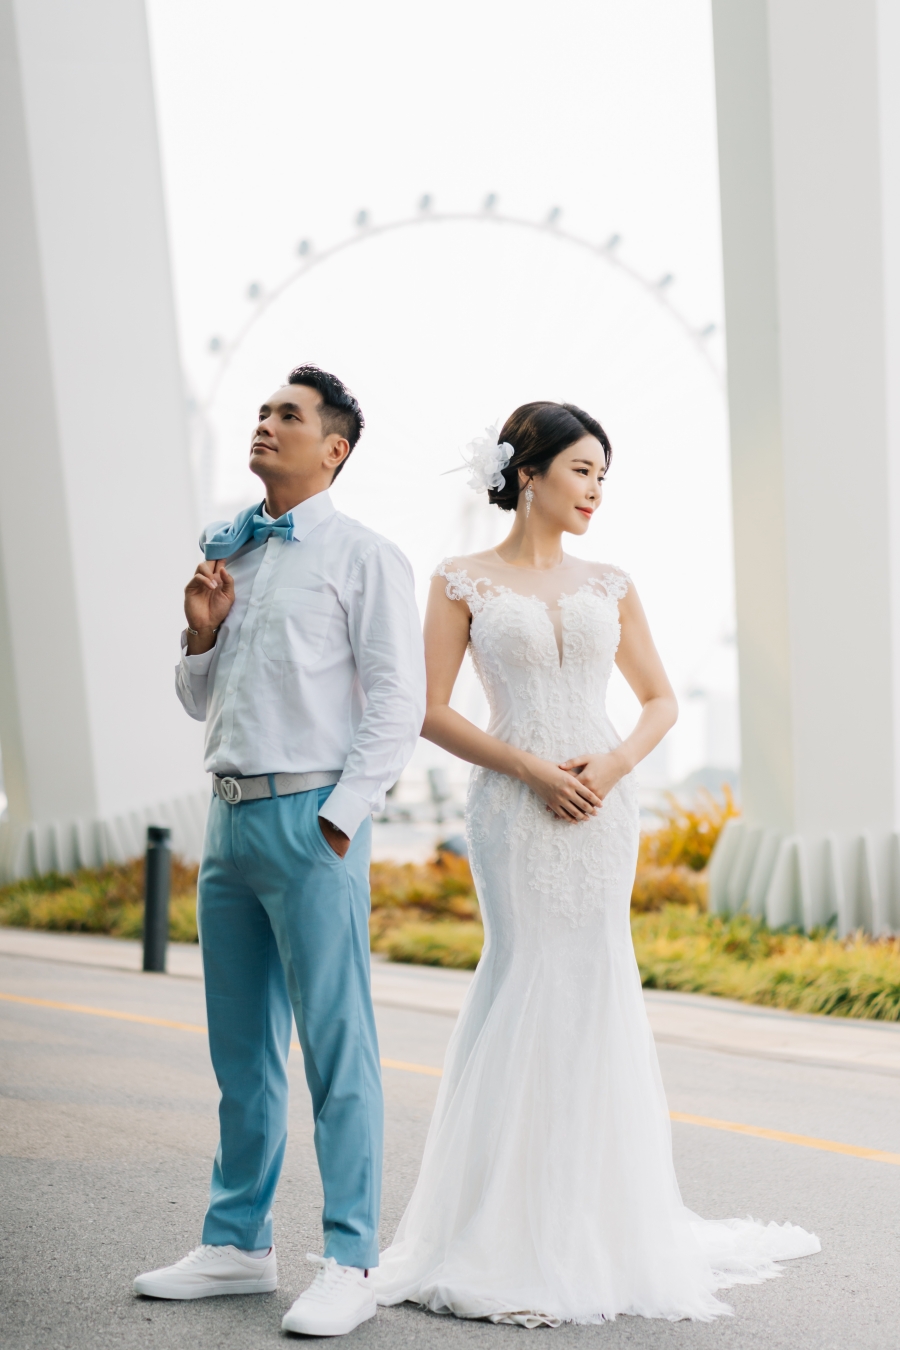 Singapore Pre-Wedding Photoshoot At Cloud Forest, Fort Canning Spiral Staircase And Marina Bay For Korean Couple  by Michael  on OneThreeOneFour 5